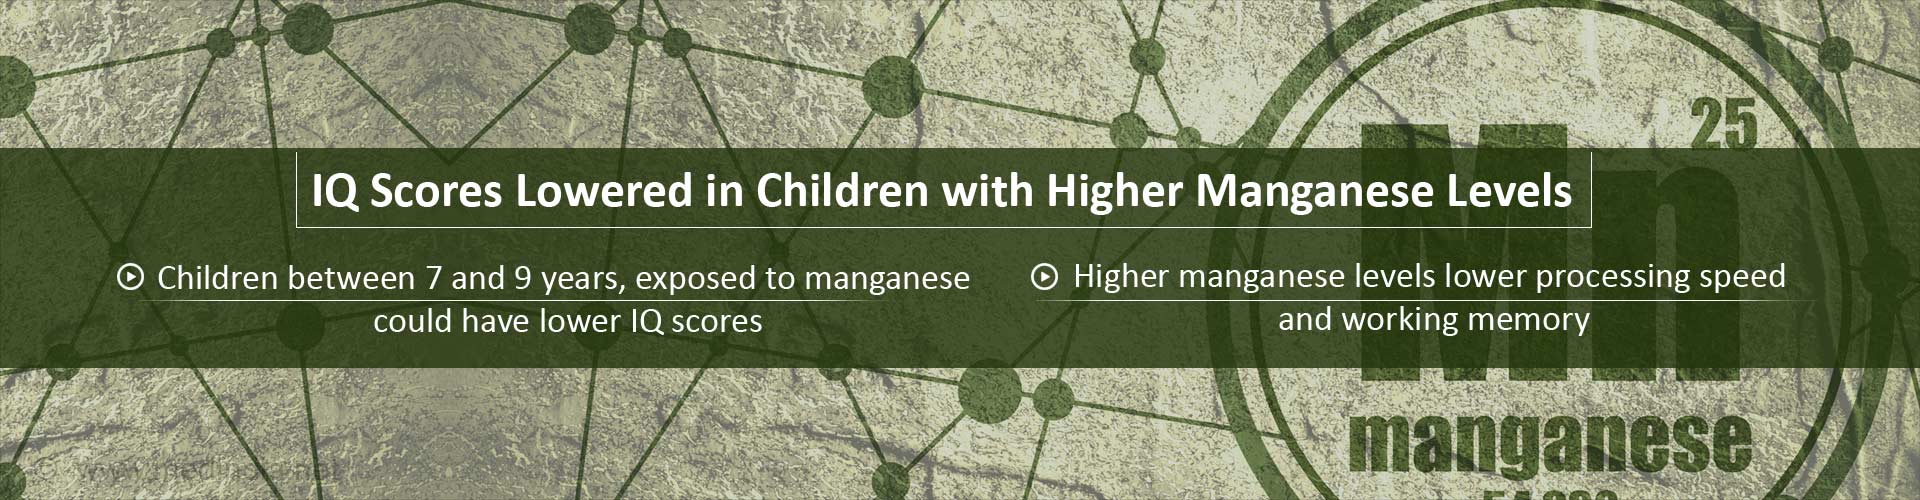 IQ Scores Lowered in Children with Higher Manganese Levels
- Children between 7 and 9 years, exposed to manganese could have lower IQ scores
- Higher manganese levels lower processing speed and working memory